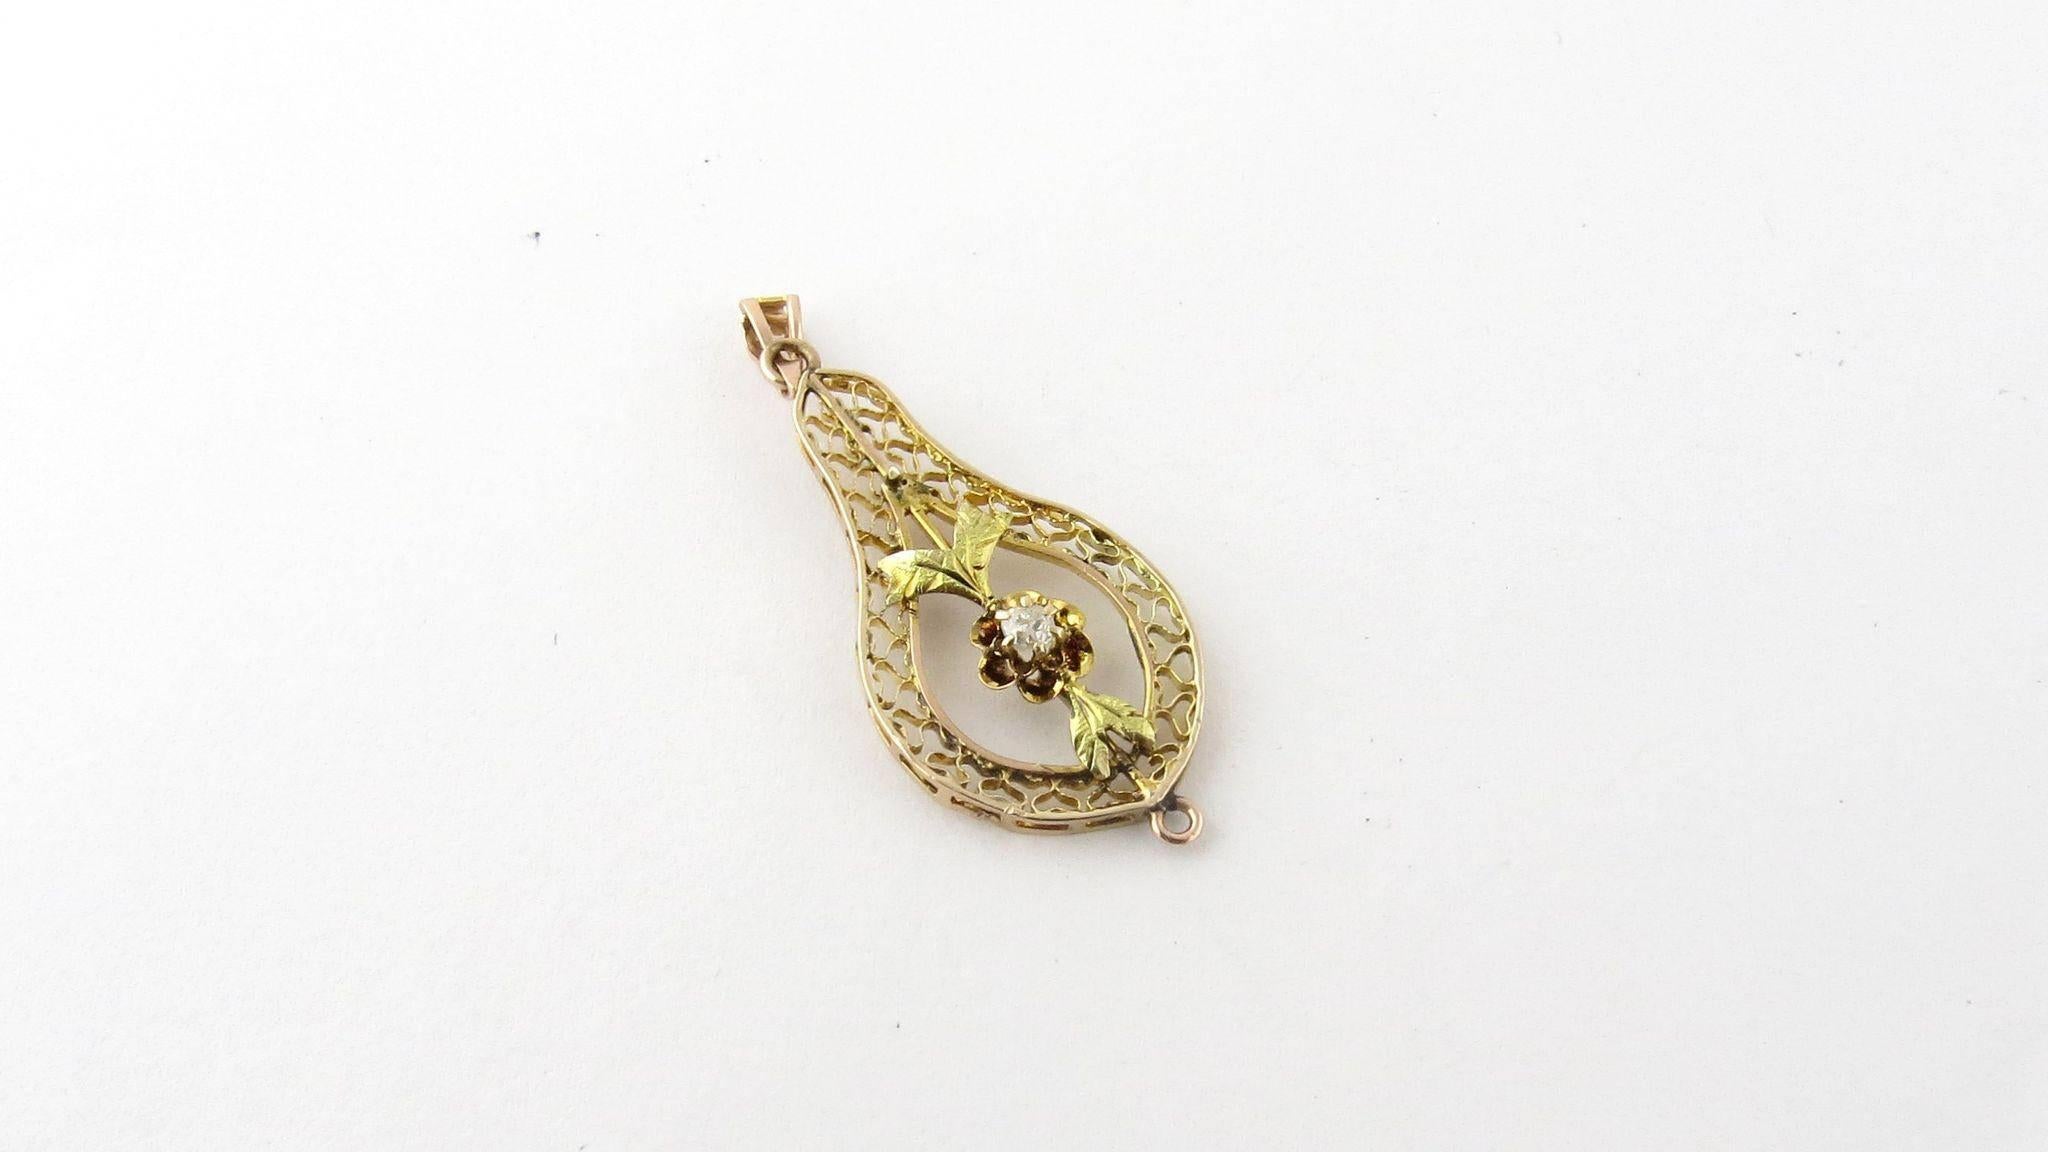 Vintage 14K Yellow Gold Diamond Filagree Pendant

 36 mm in length 14 mm across 

.7 dwt /1.2 g

 .03 old miner diamond in center

 Marked 14K 

Will come shipped priority mail with insurance in a gift box.